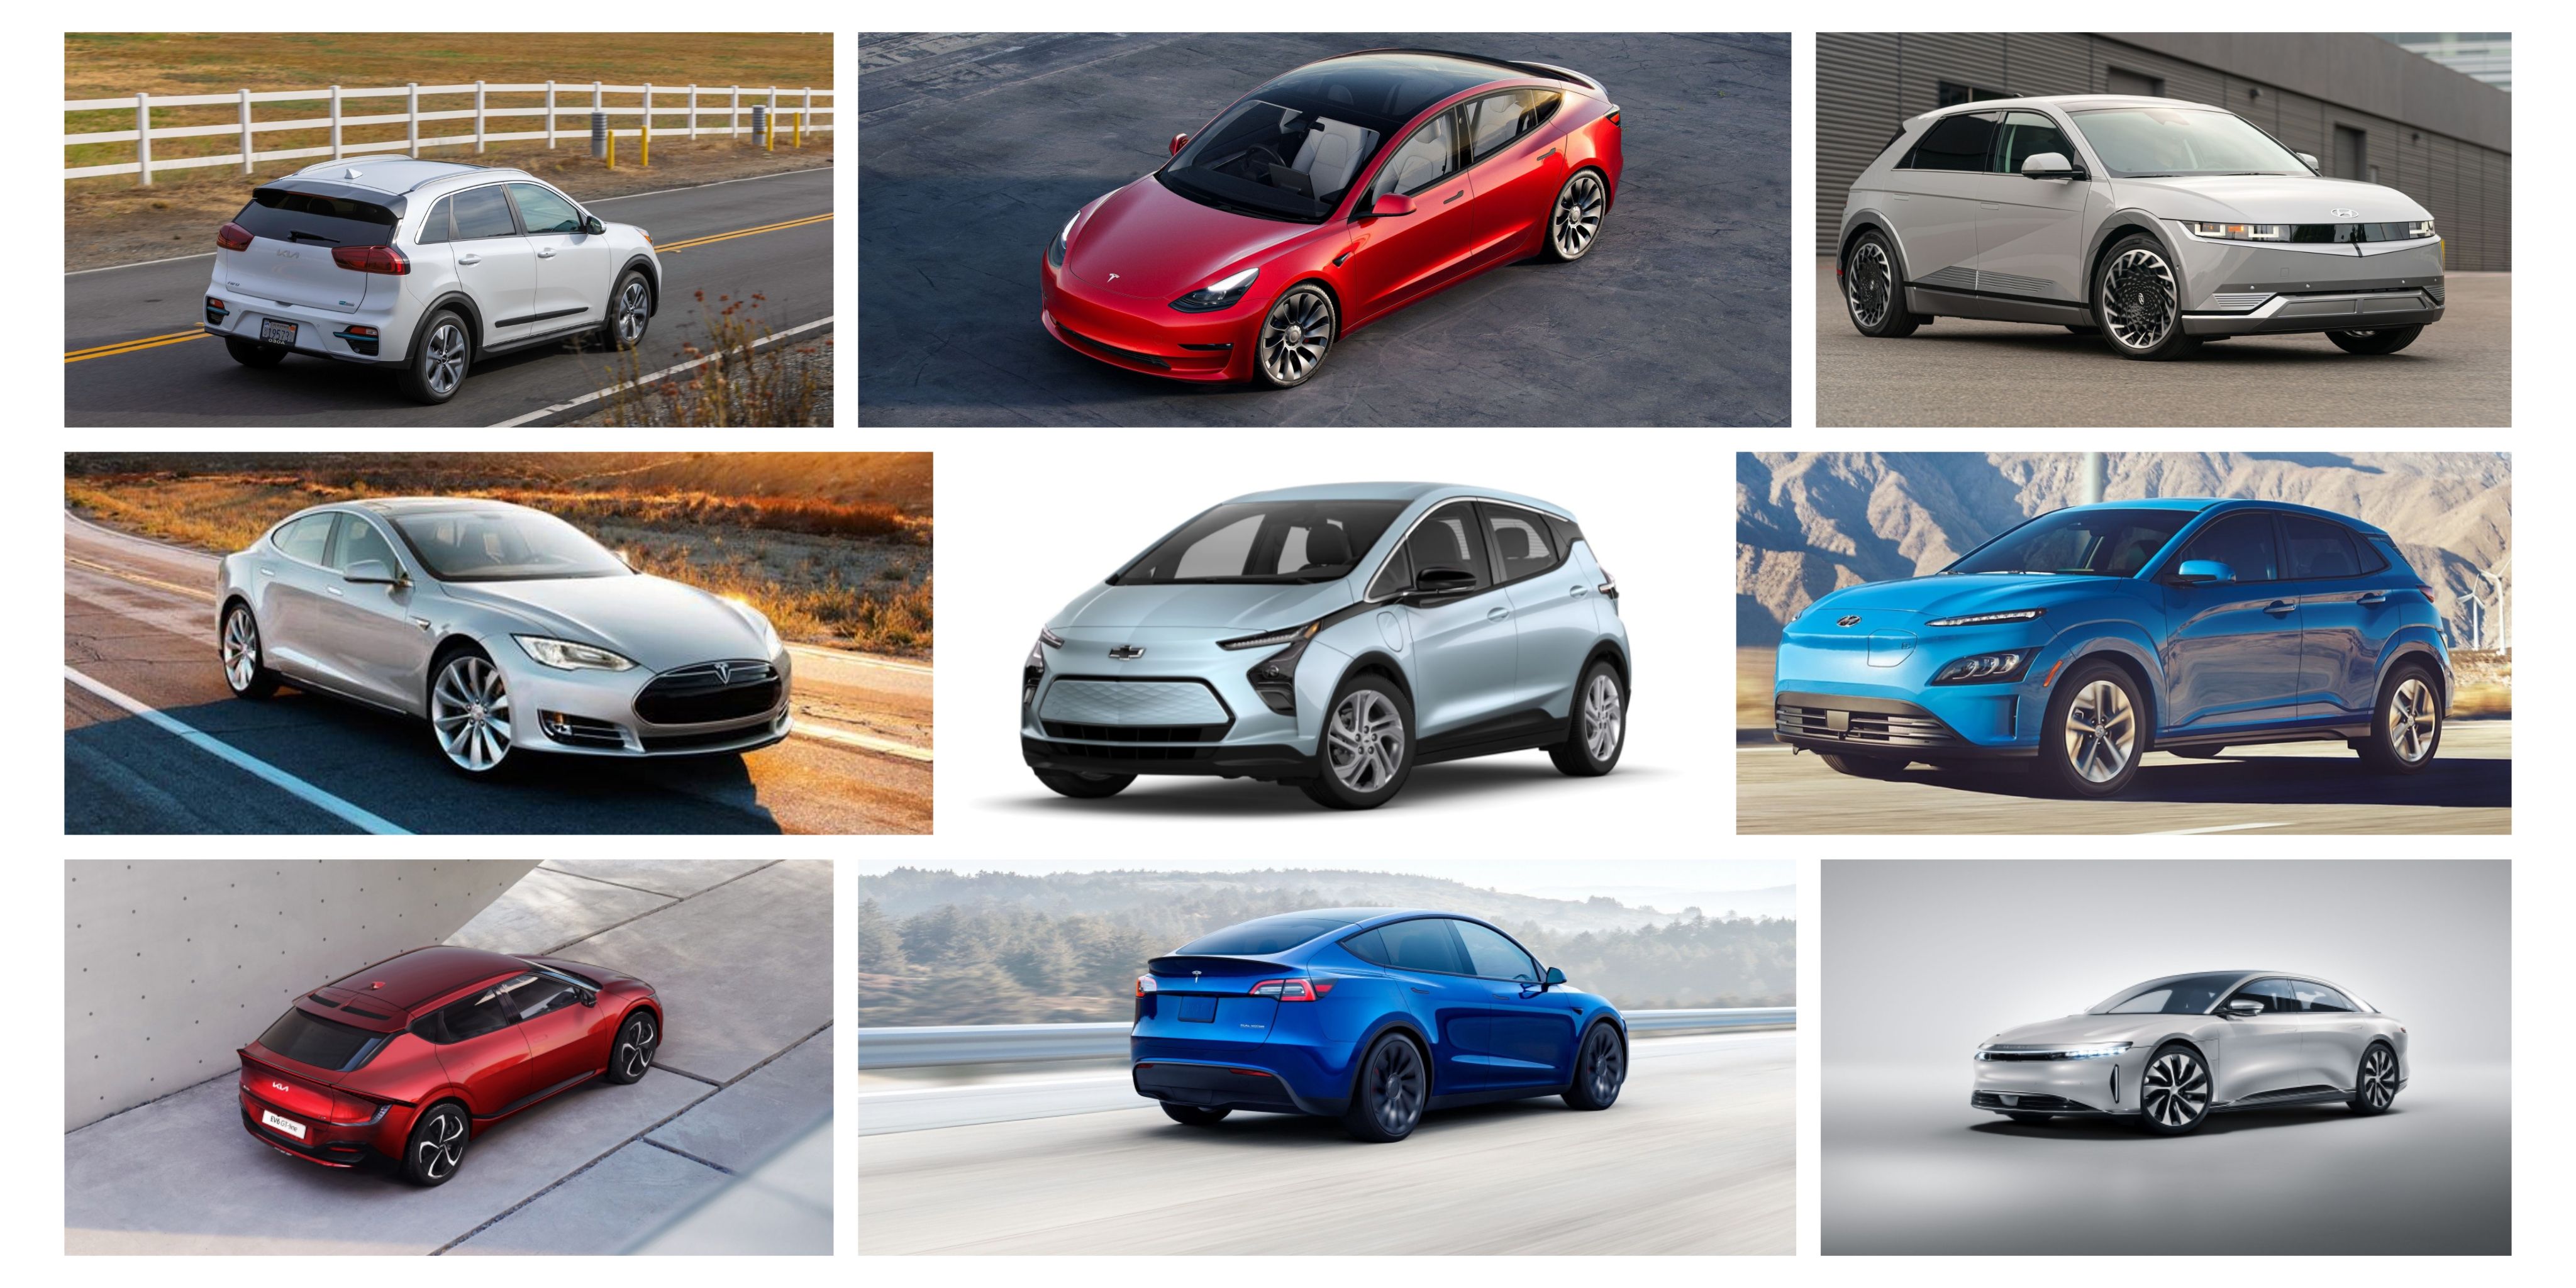 Where Can You Find the Best Fuel Economy USA Made Cars?